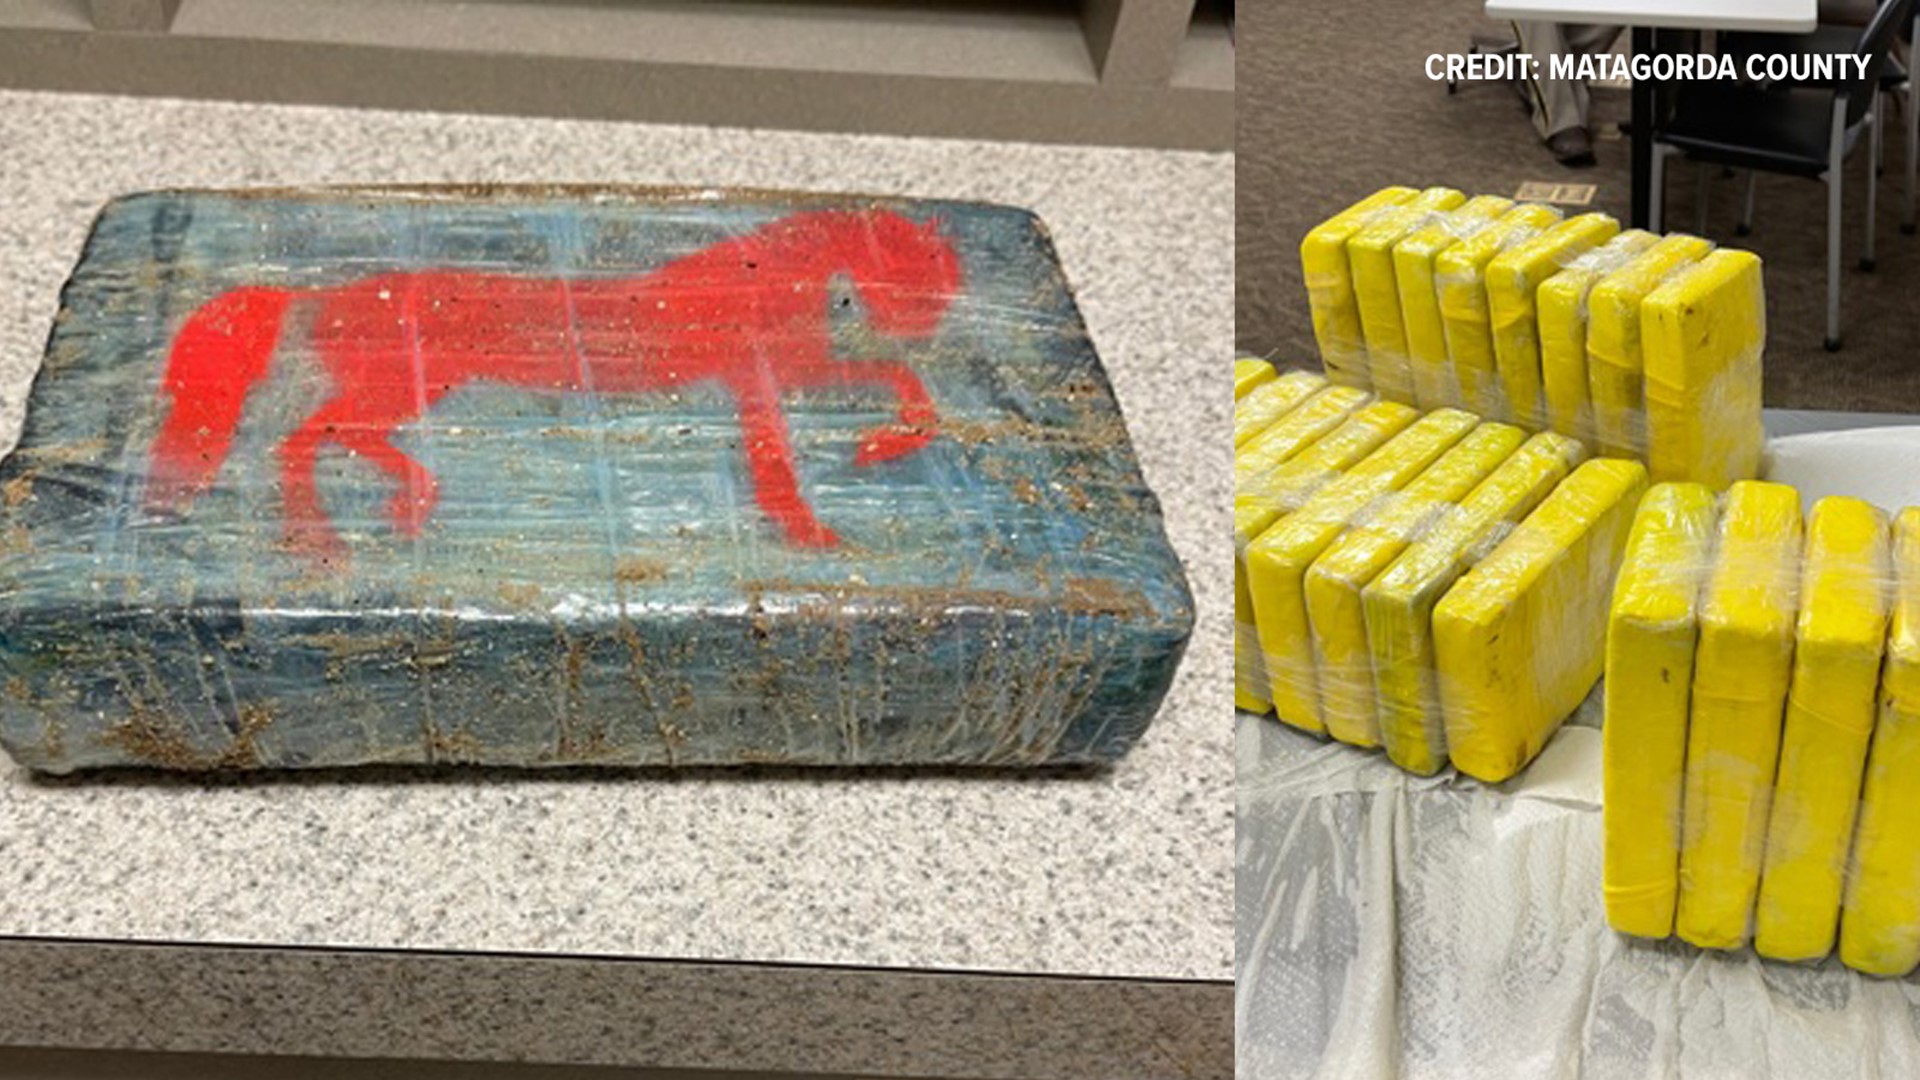 These packages were found in Matagorda County